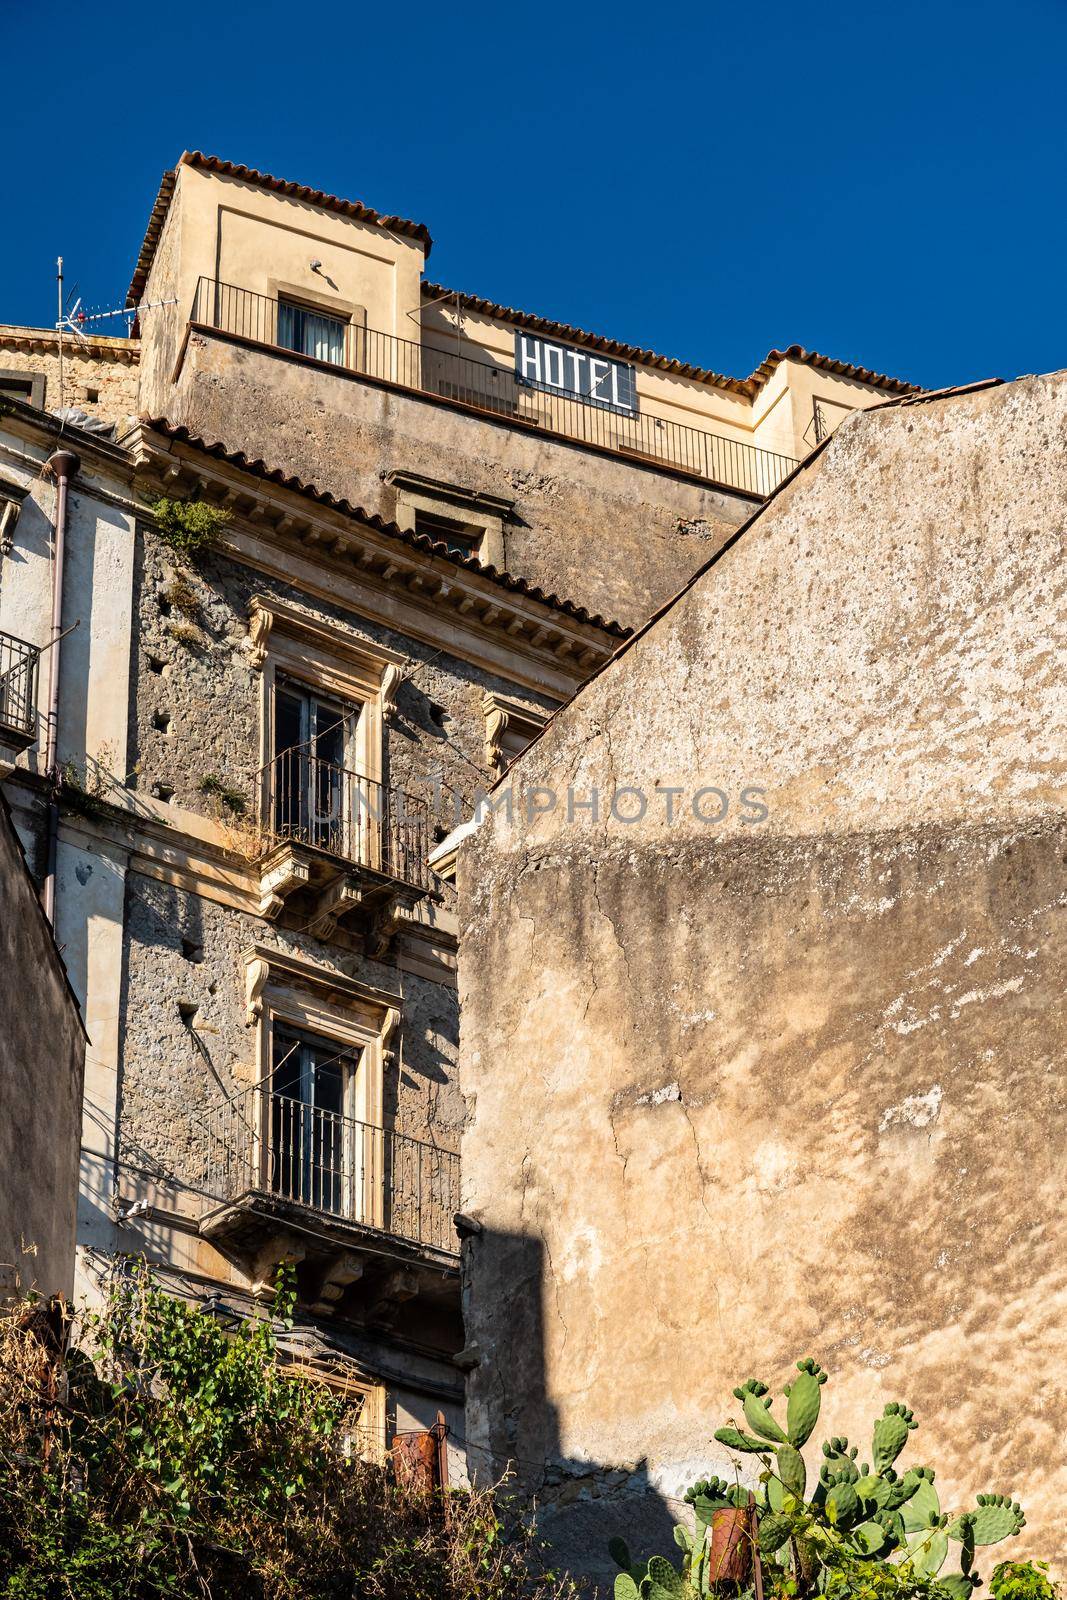 Old abandoned houses in a typical staircase road, Castiglione di Sicilia, Italy